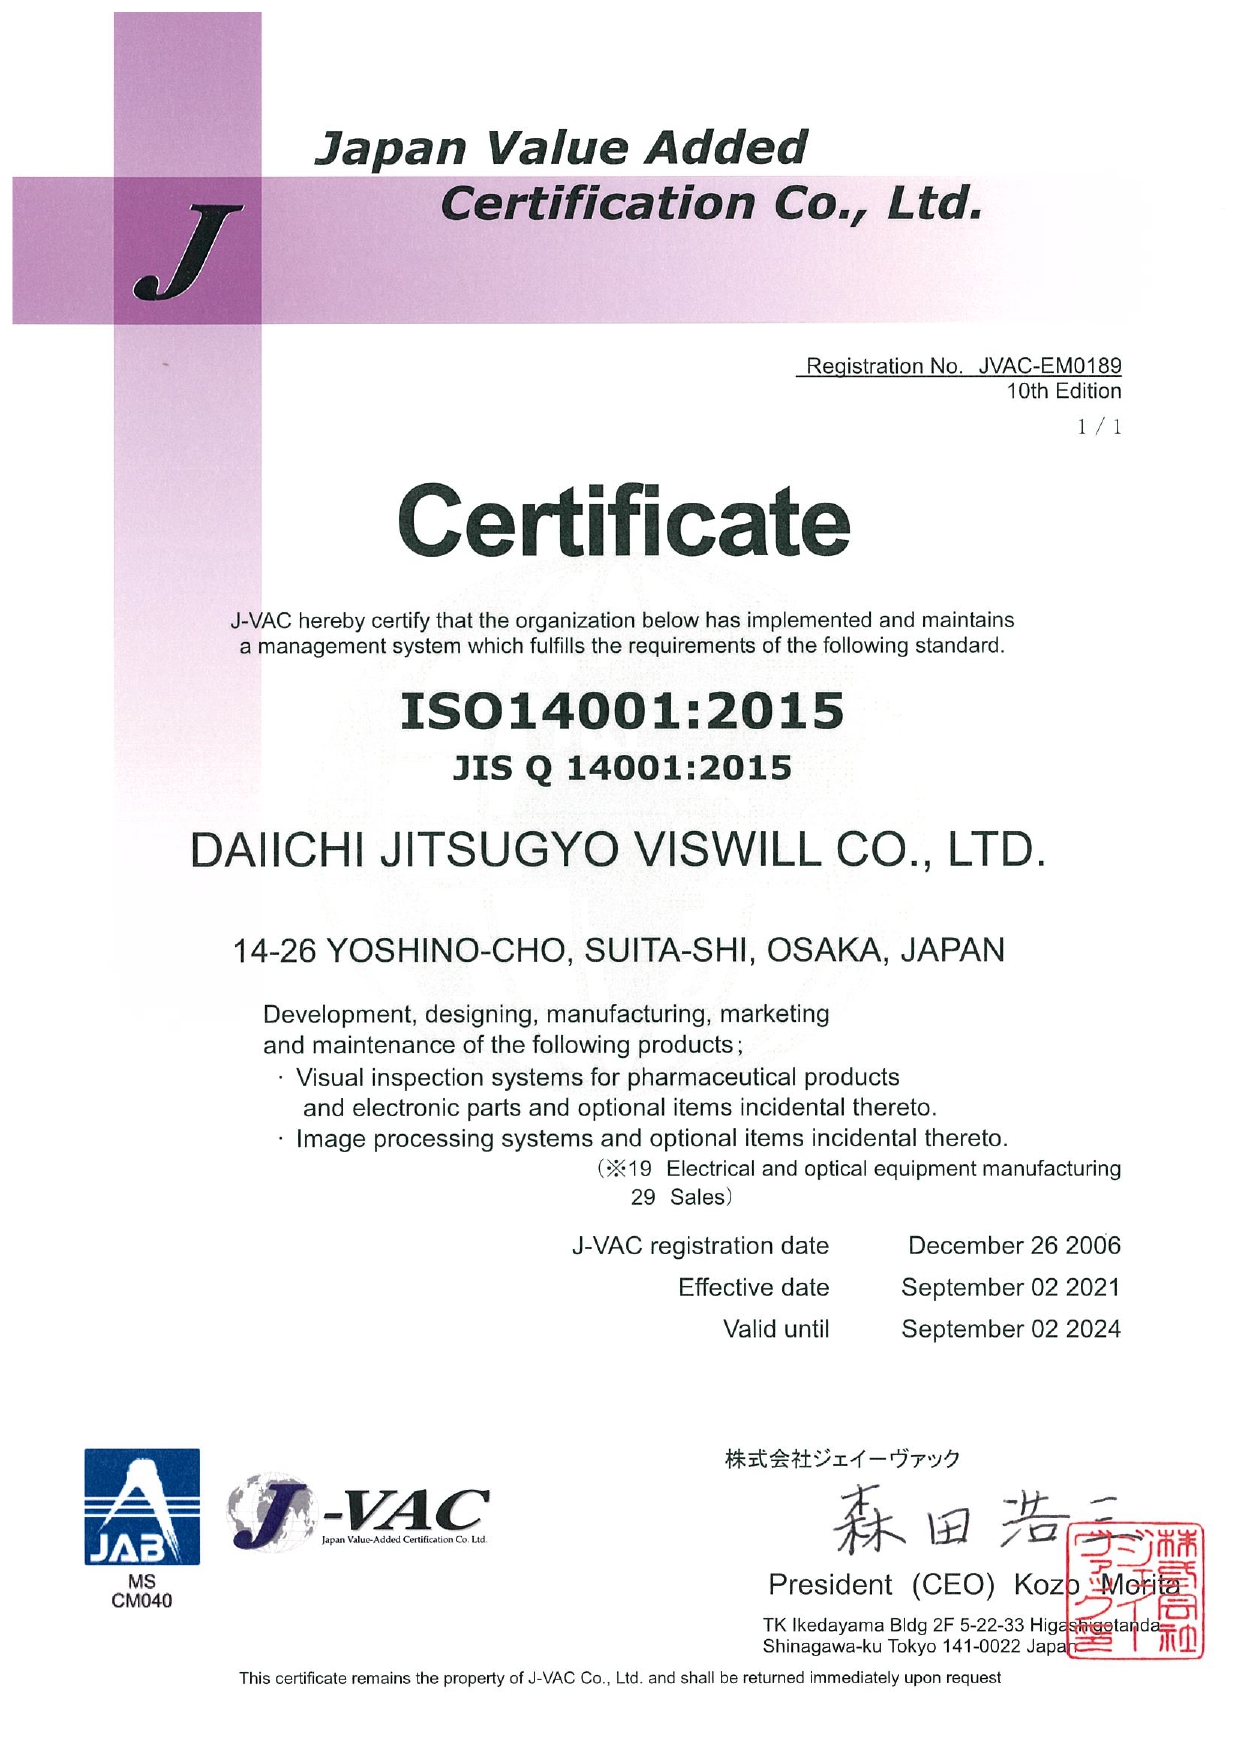 Acquisition of ISO 14001